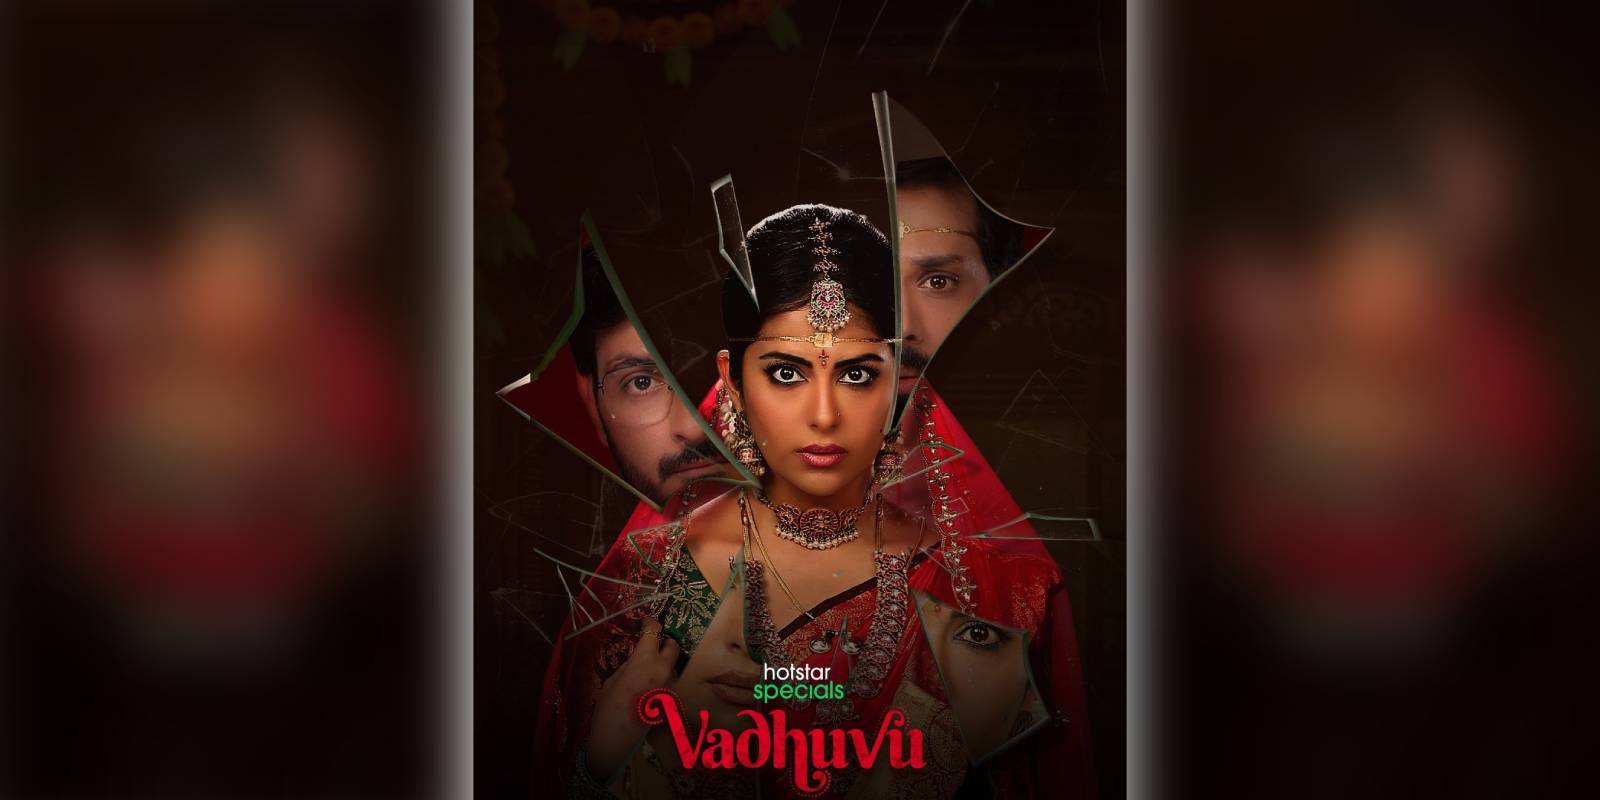 A poster of the film Vadhuvu